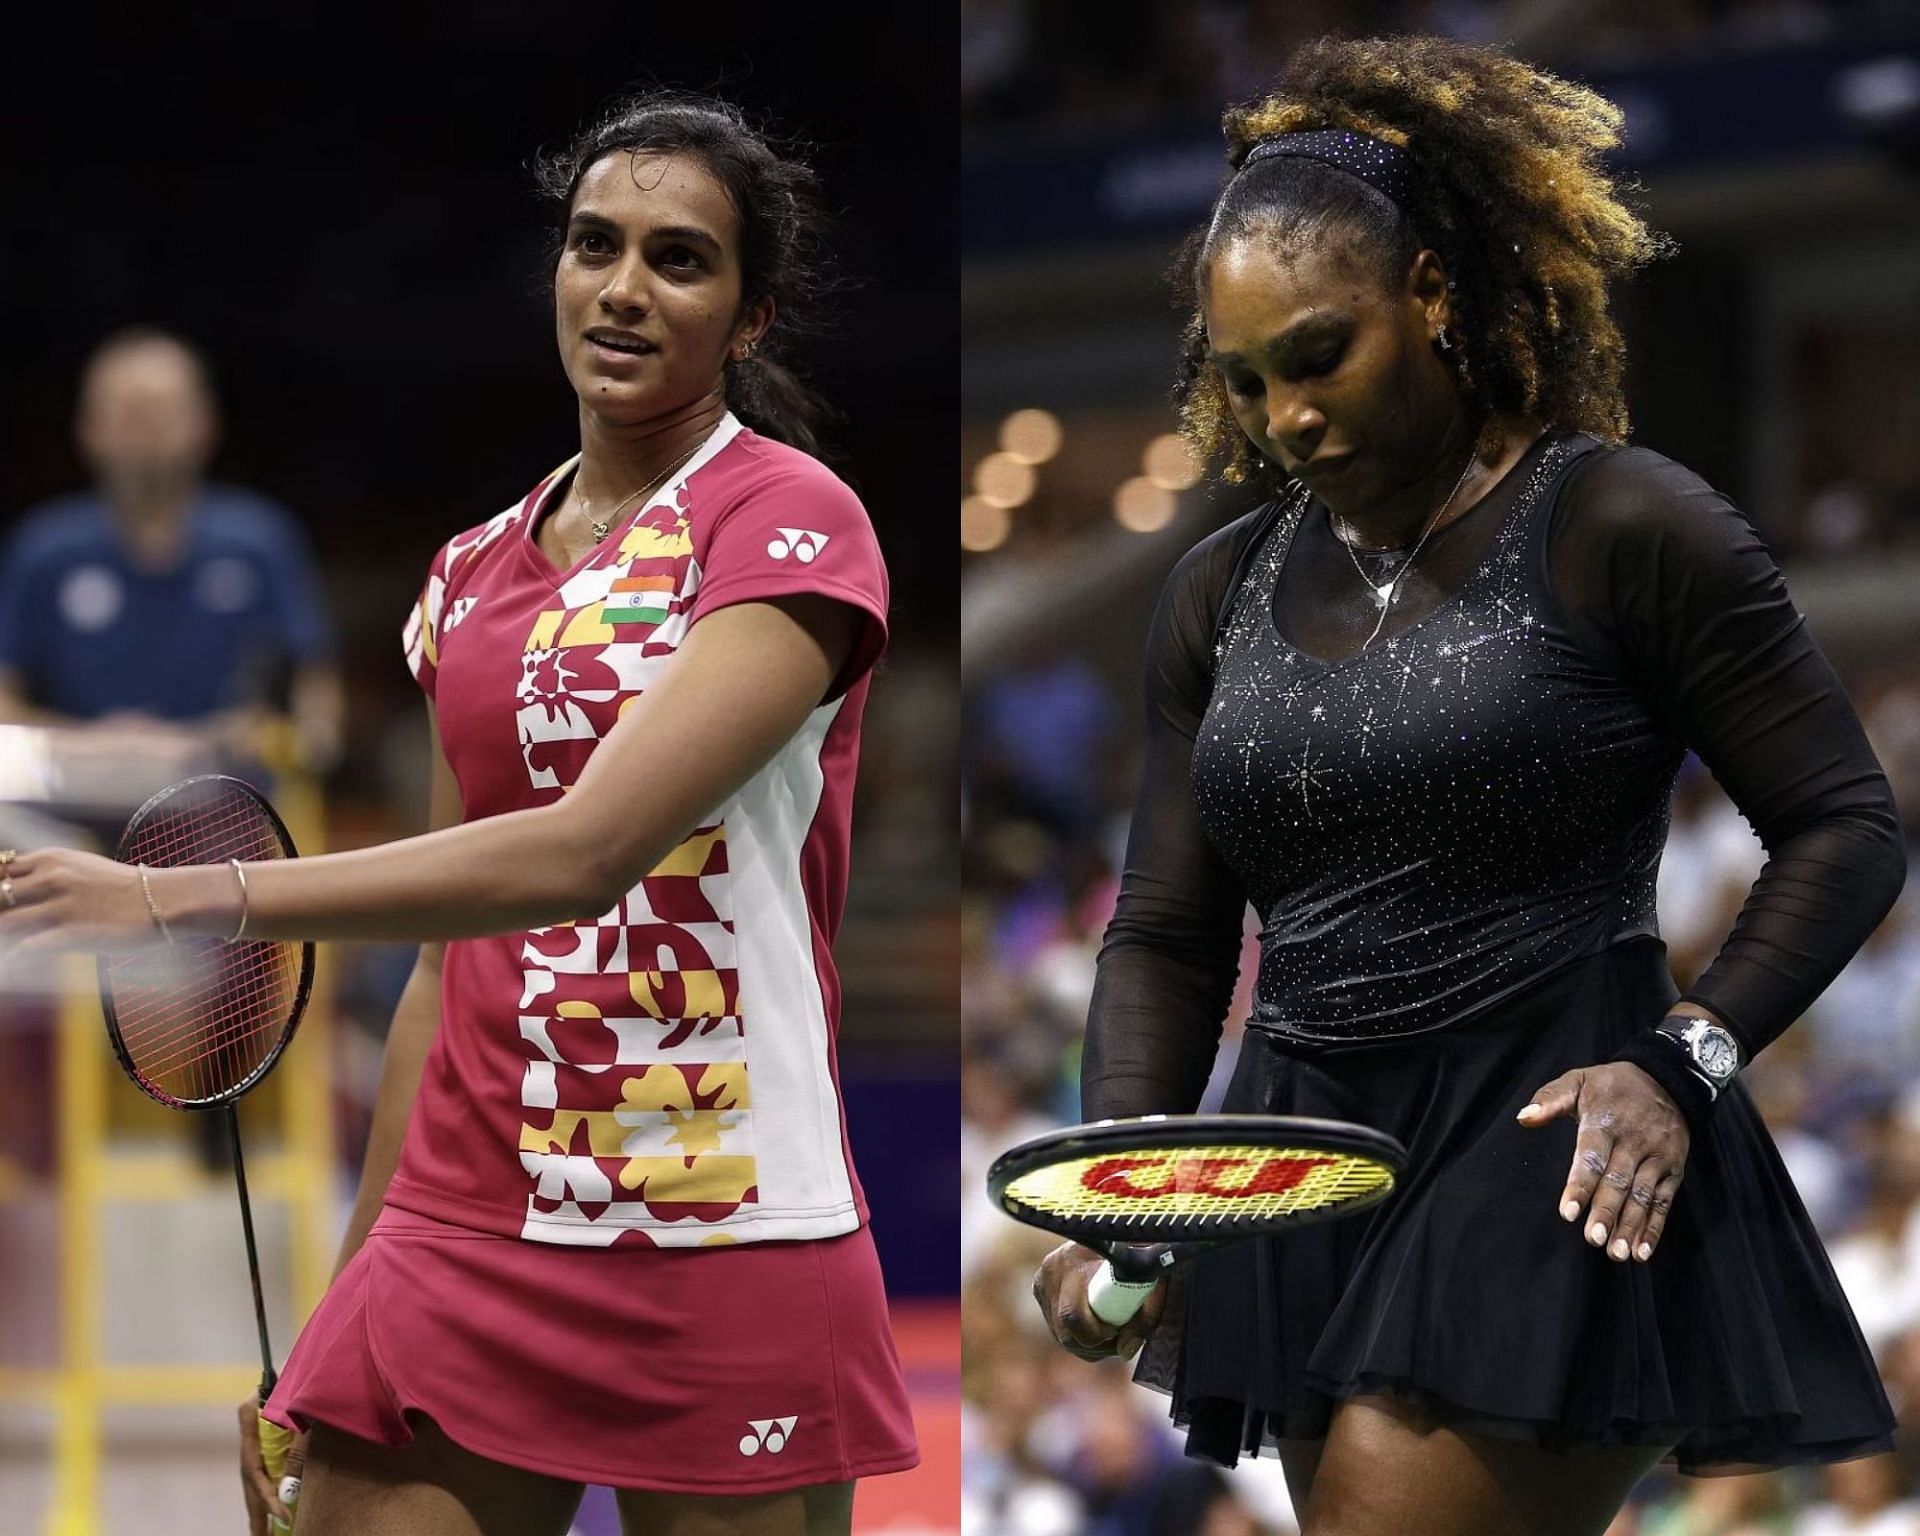 PV Sindhu (left) and Serena Williams (left) - Images via Getty Images